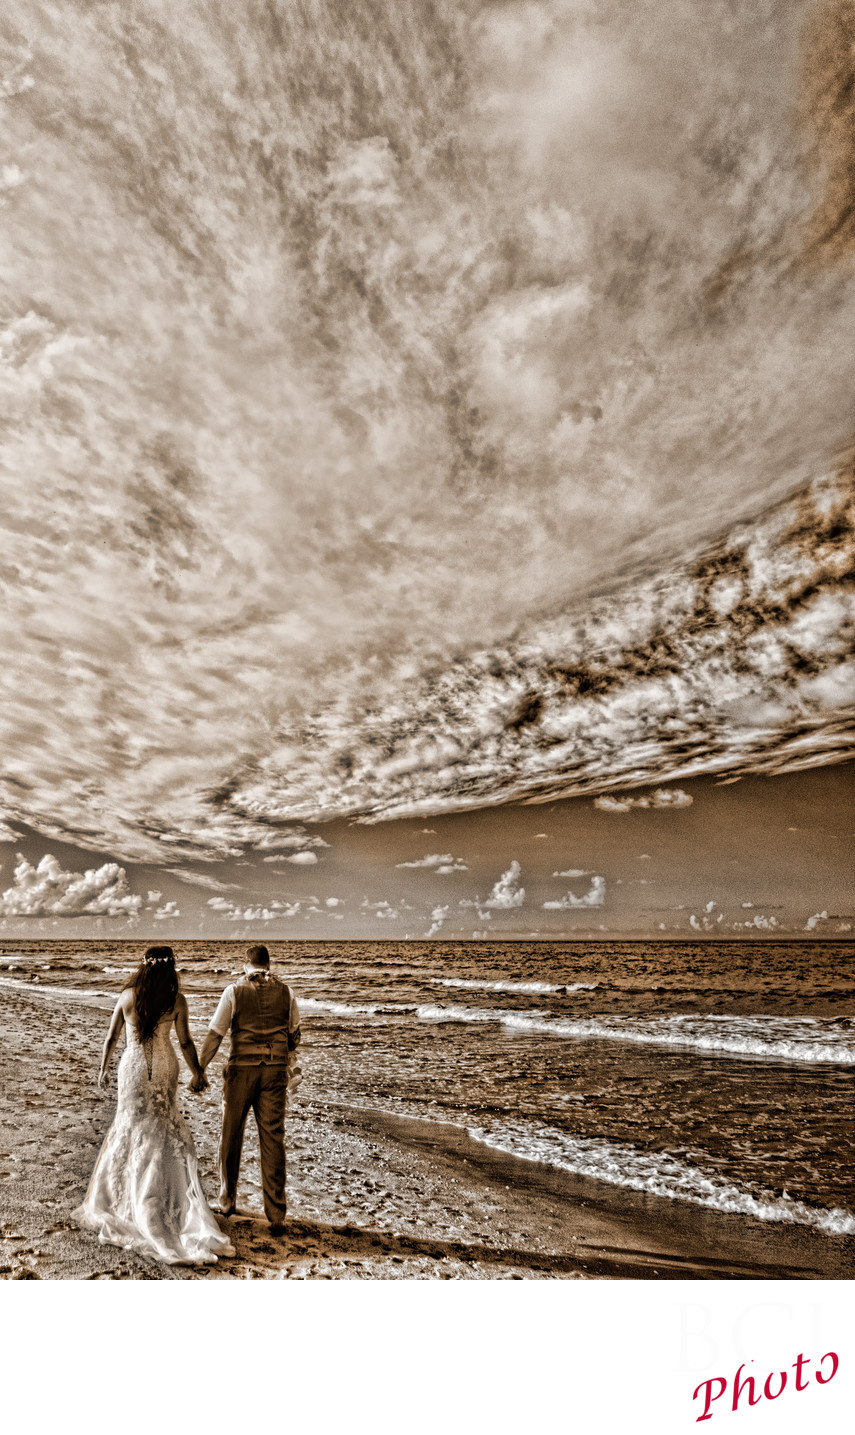 Infrared Wedding Image of bride and groom on a Beach